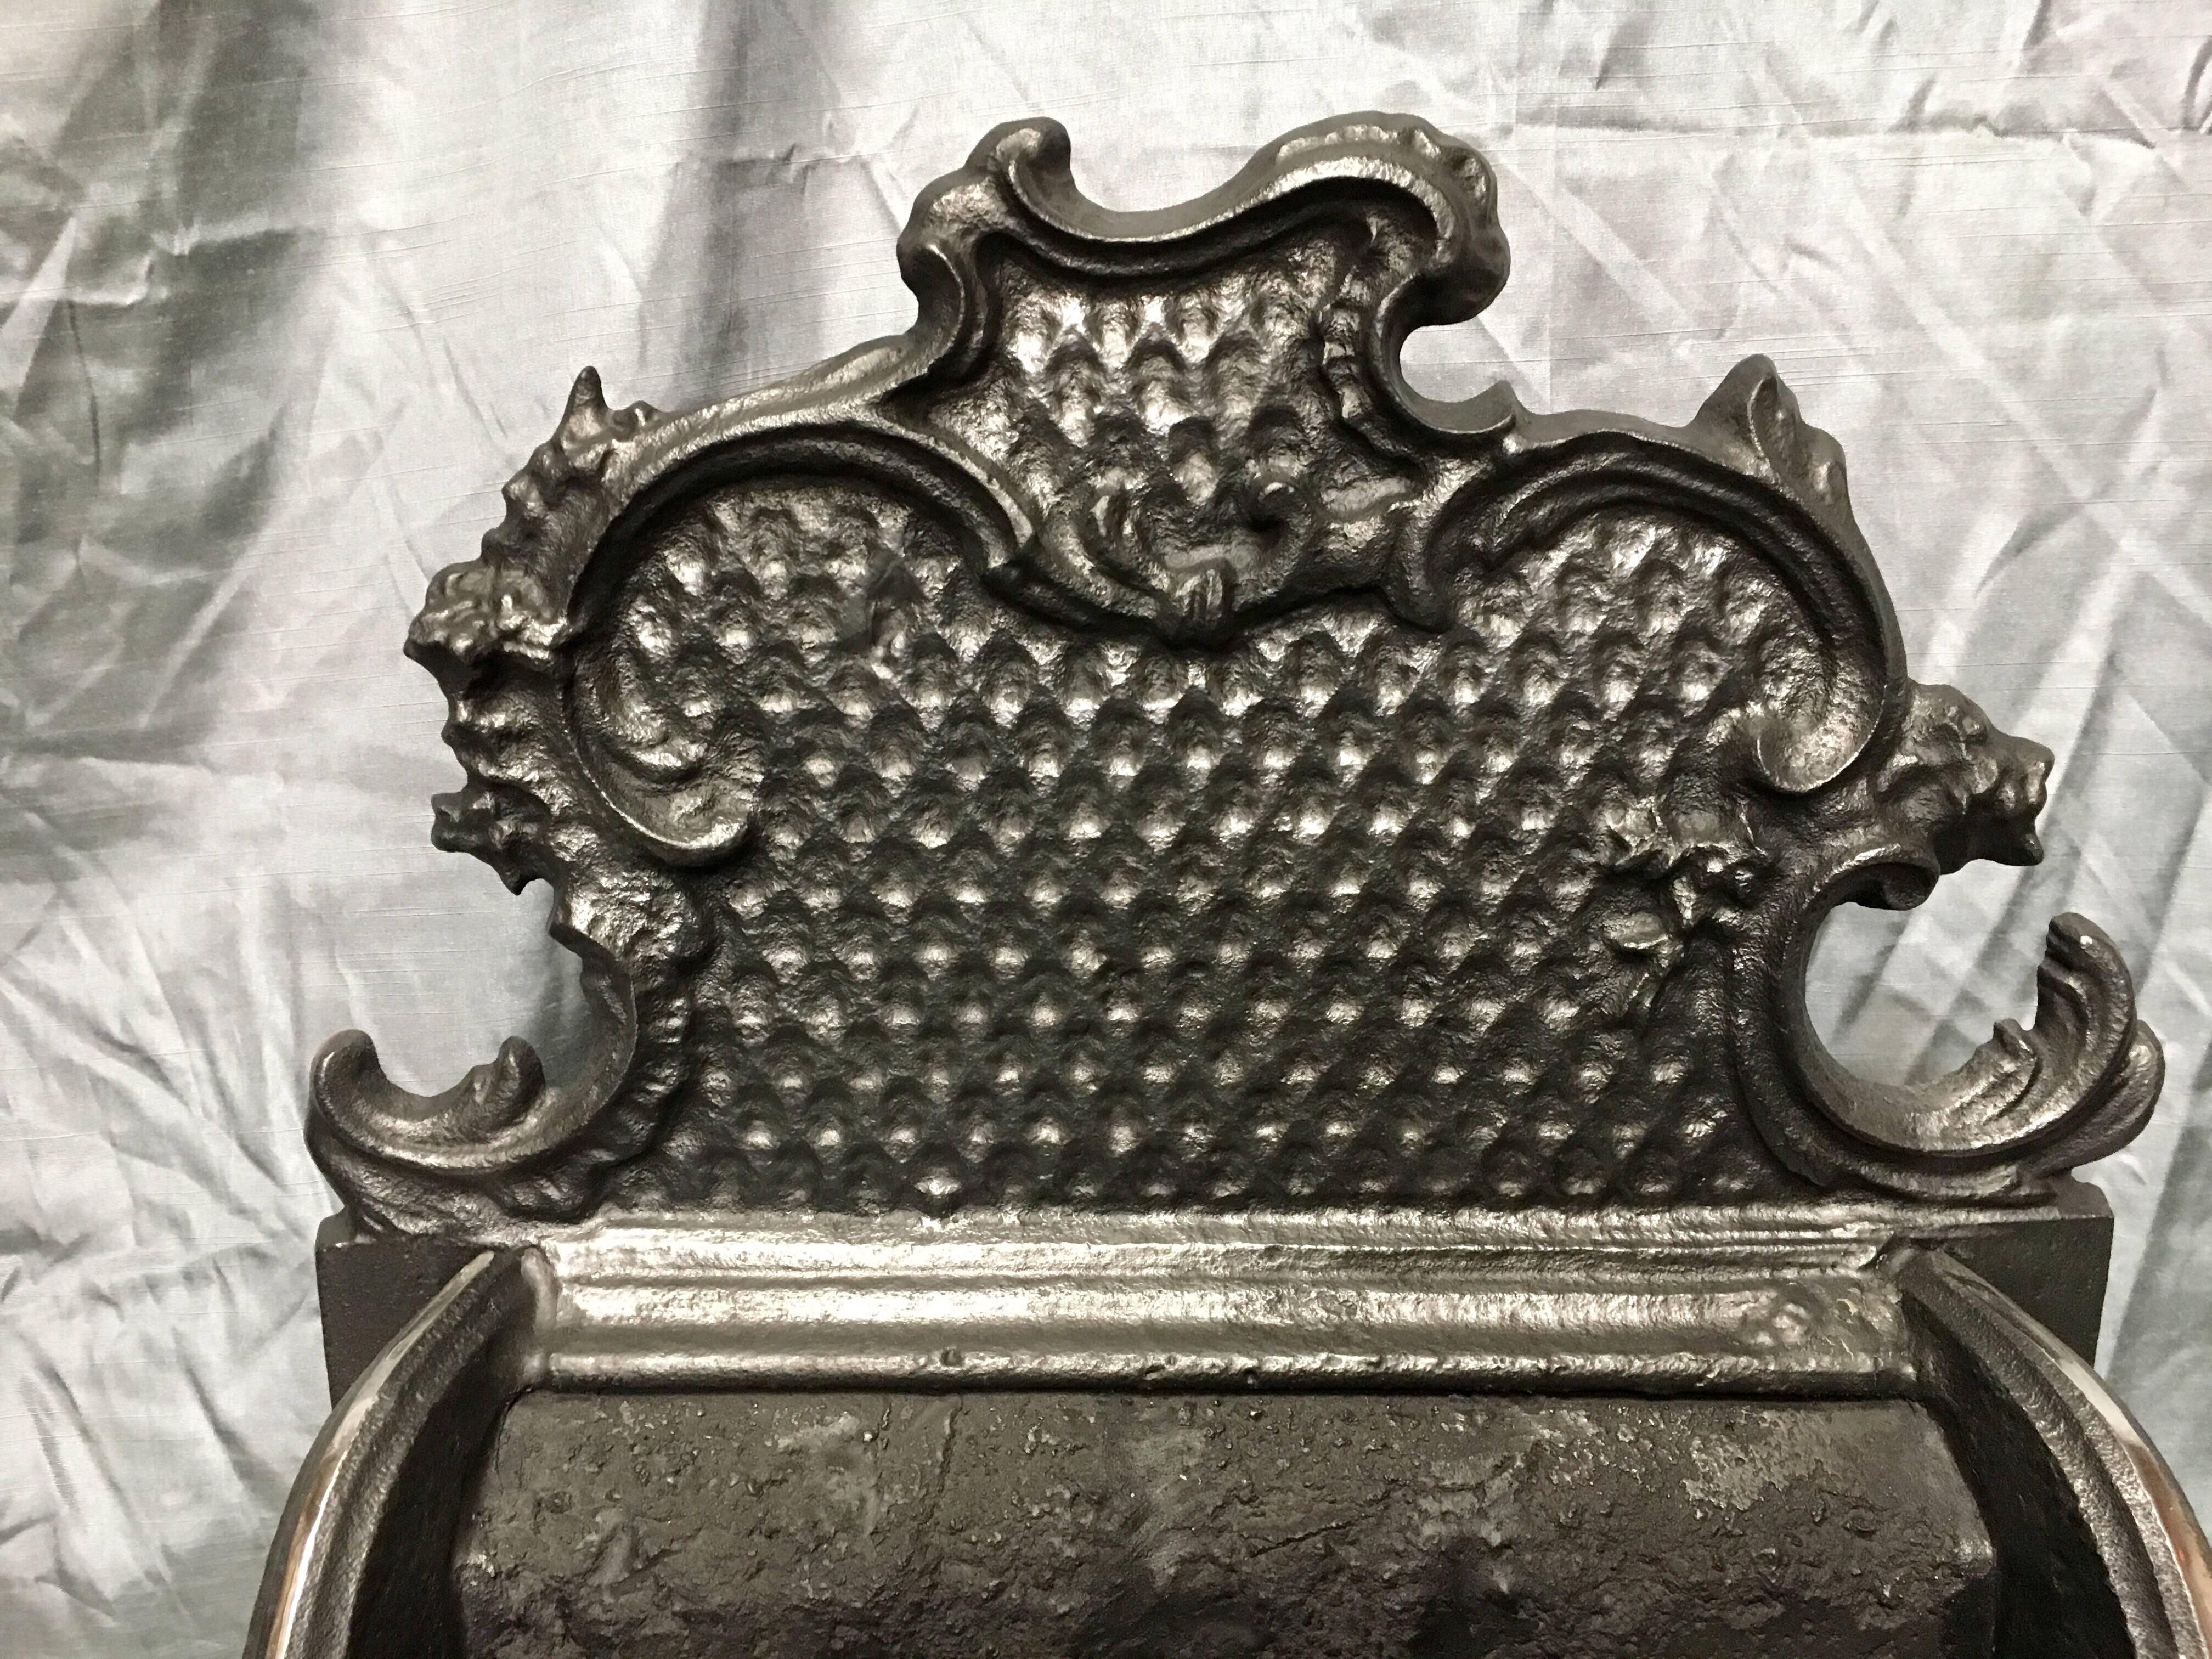 A period 20th century cast iron fire grate in the ornate 18th century English Georgian Rococo style of Thomas Chippendale. The tall 